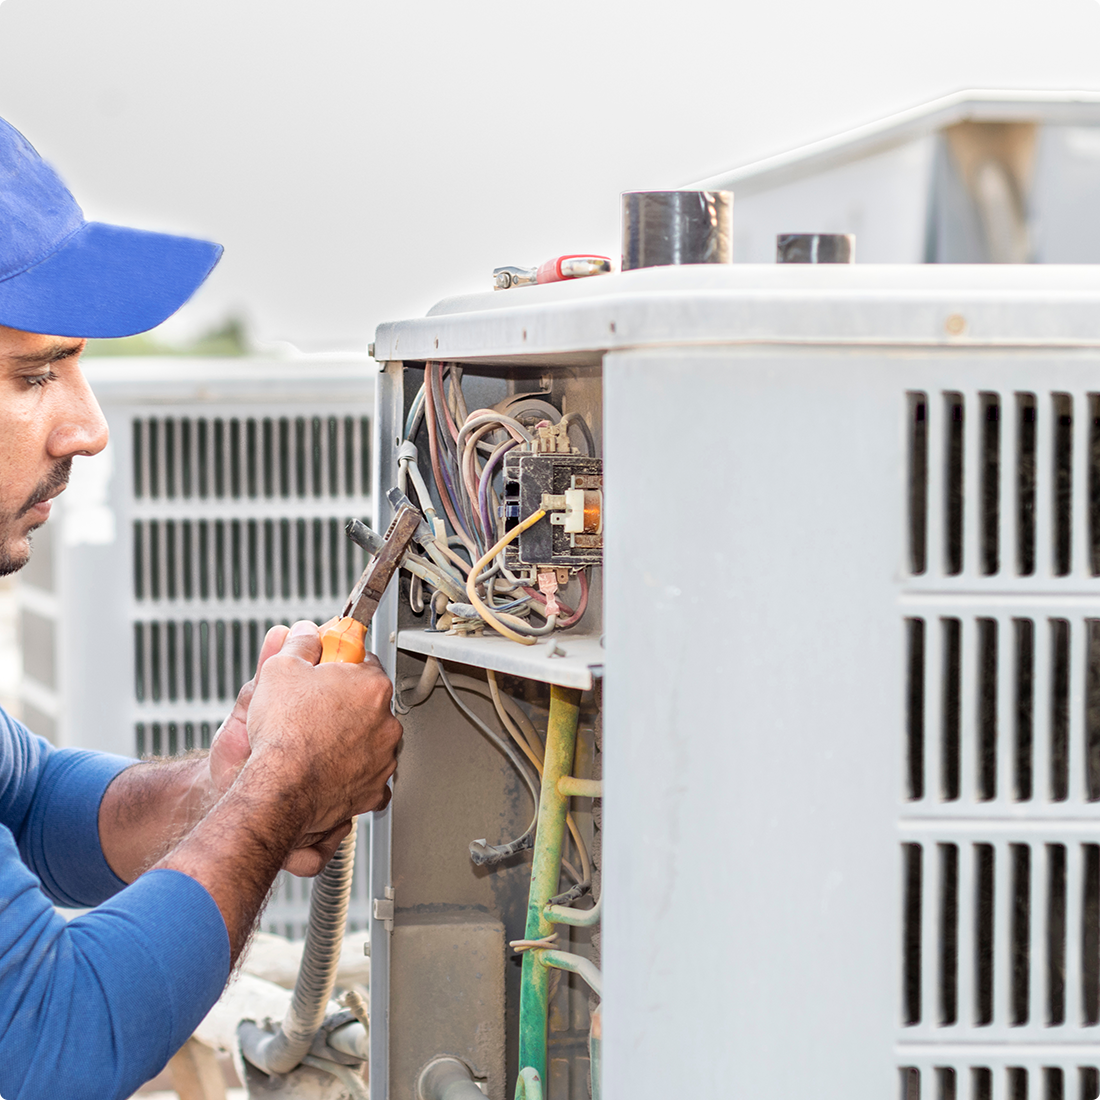 air conditioning service Airport West